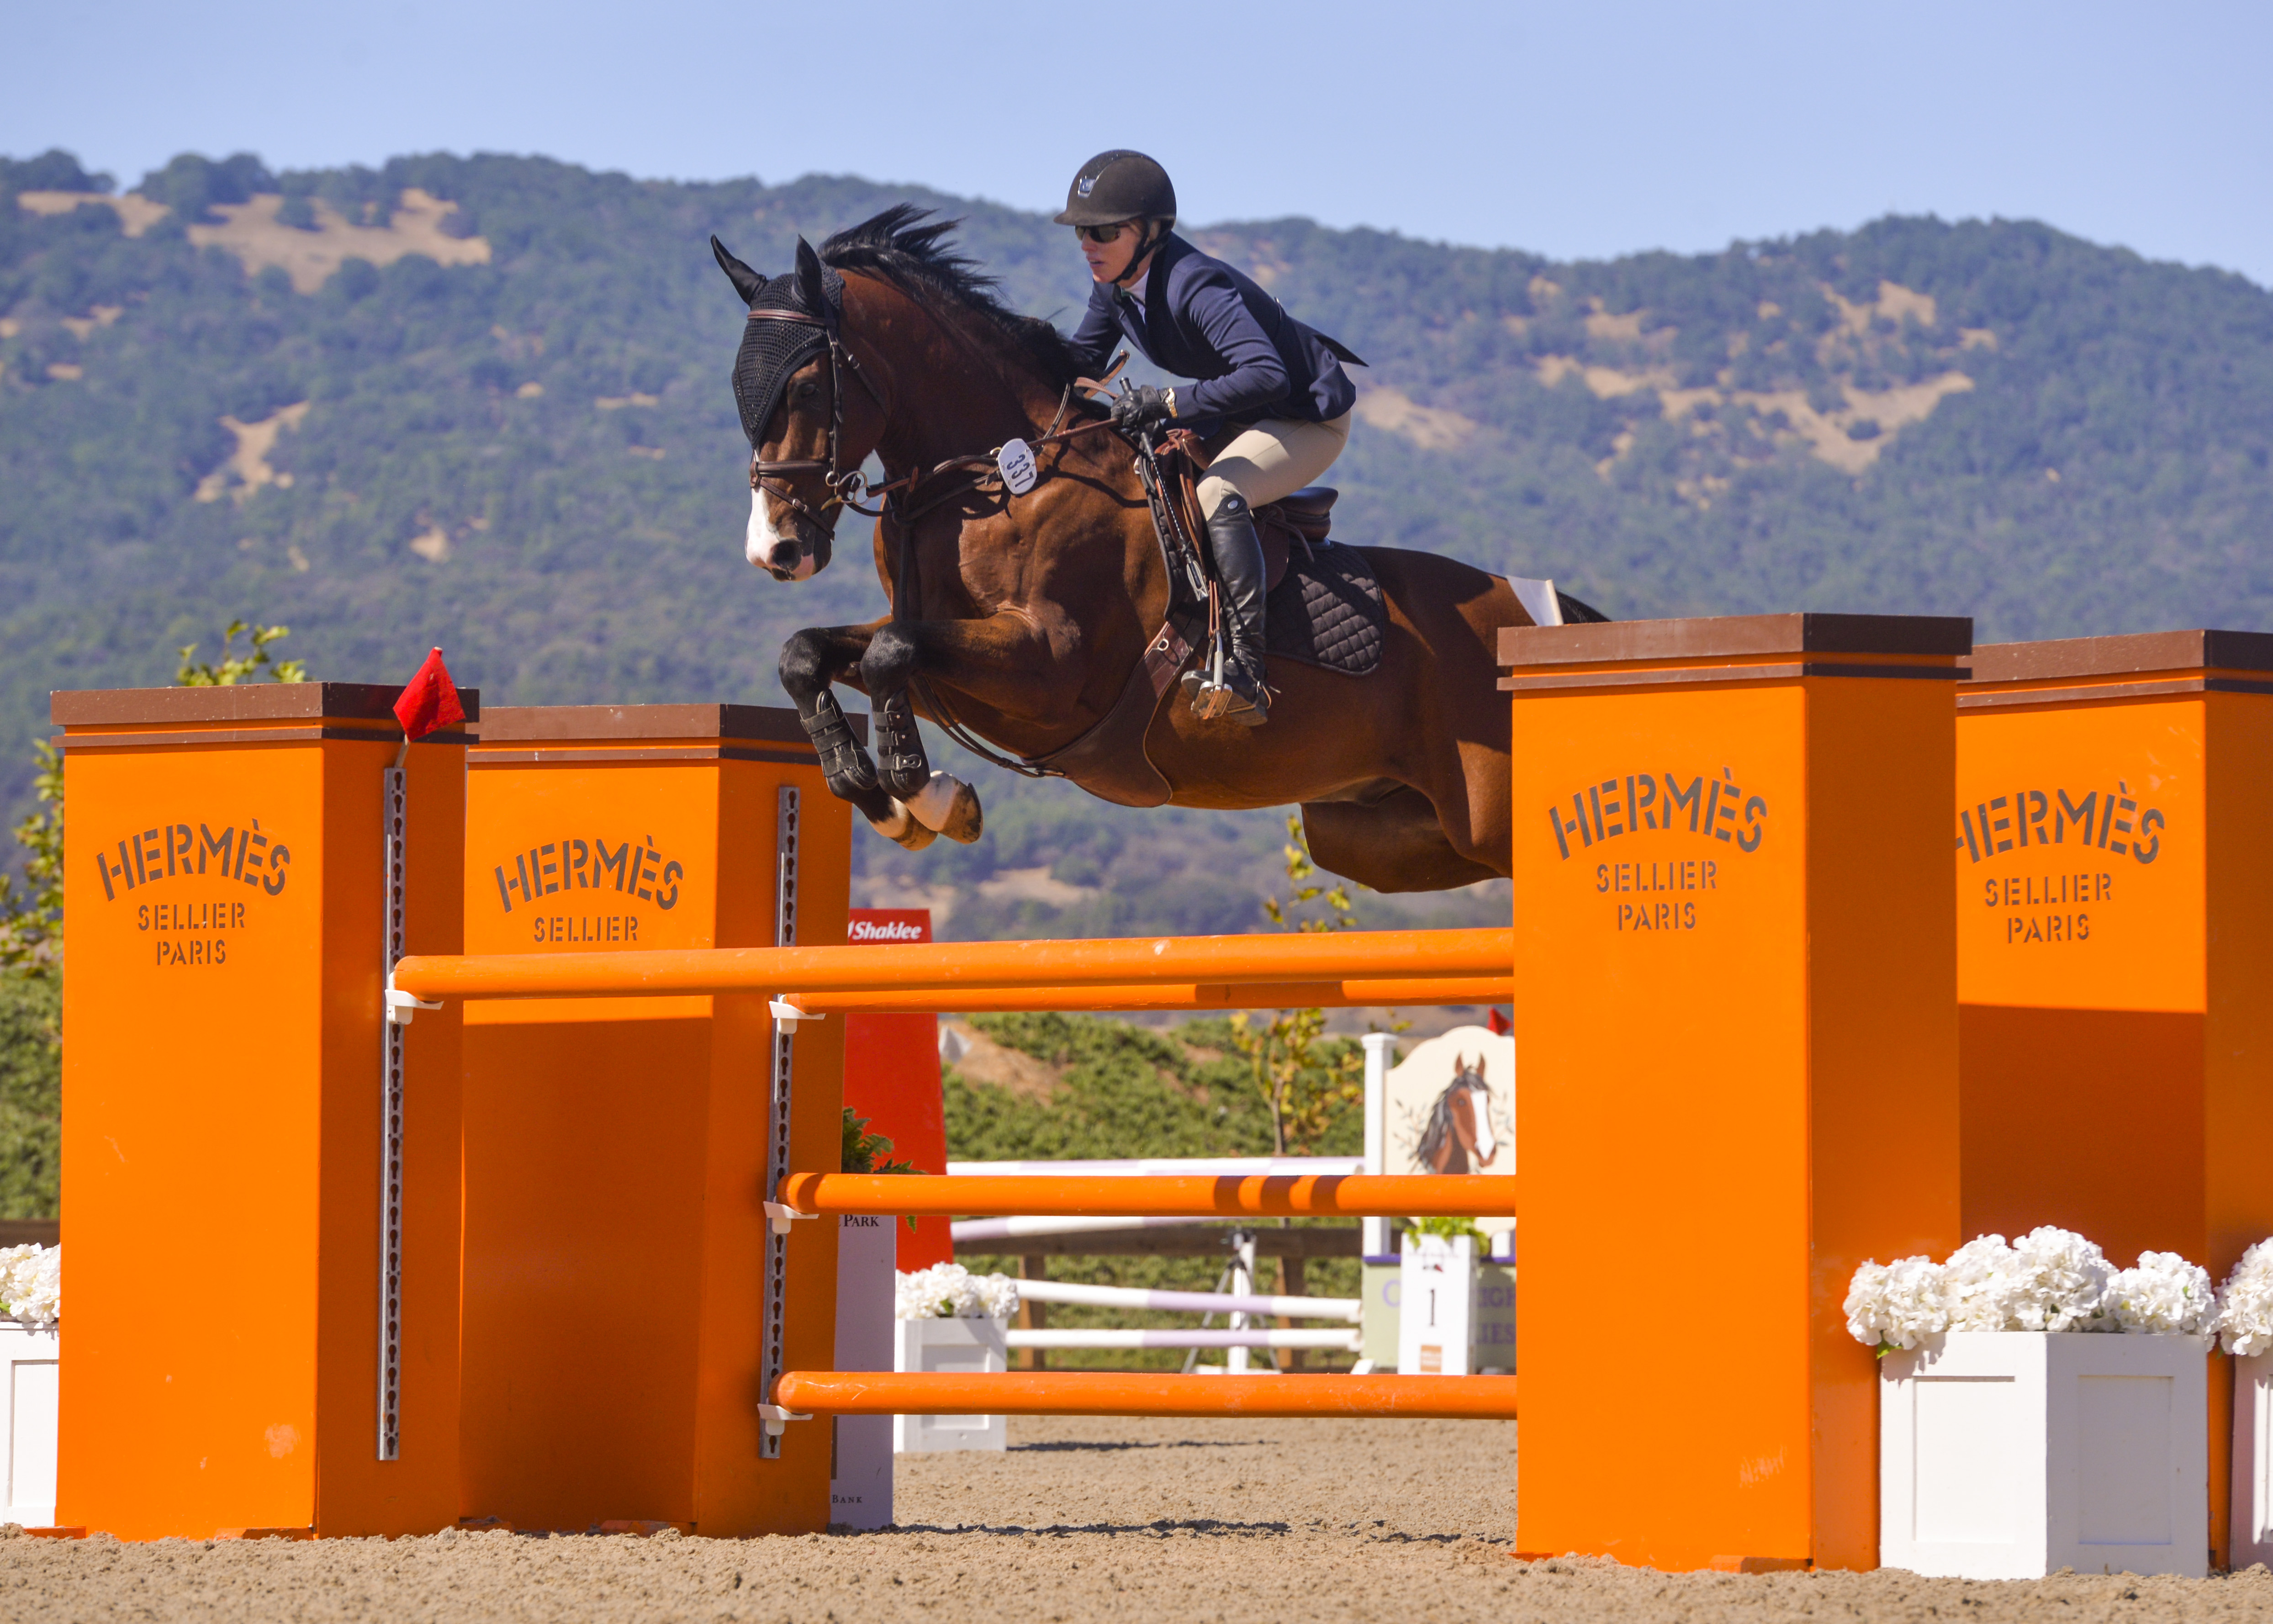 ICSS Sunplay in 1.40 Jumpers at Sonoma Horse Park pc: GrandPix